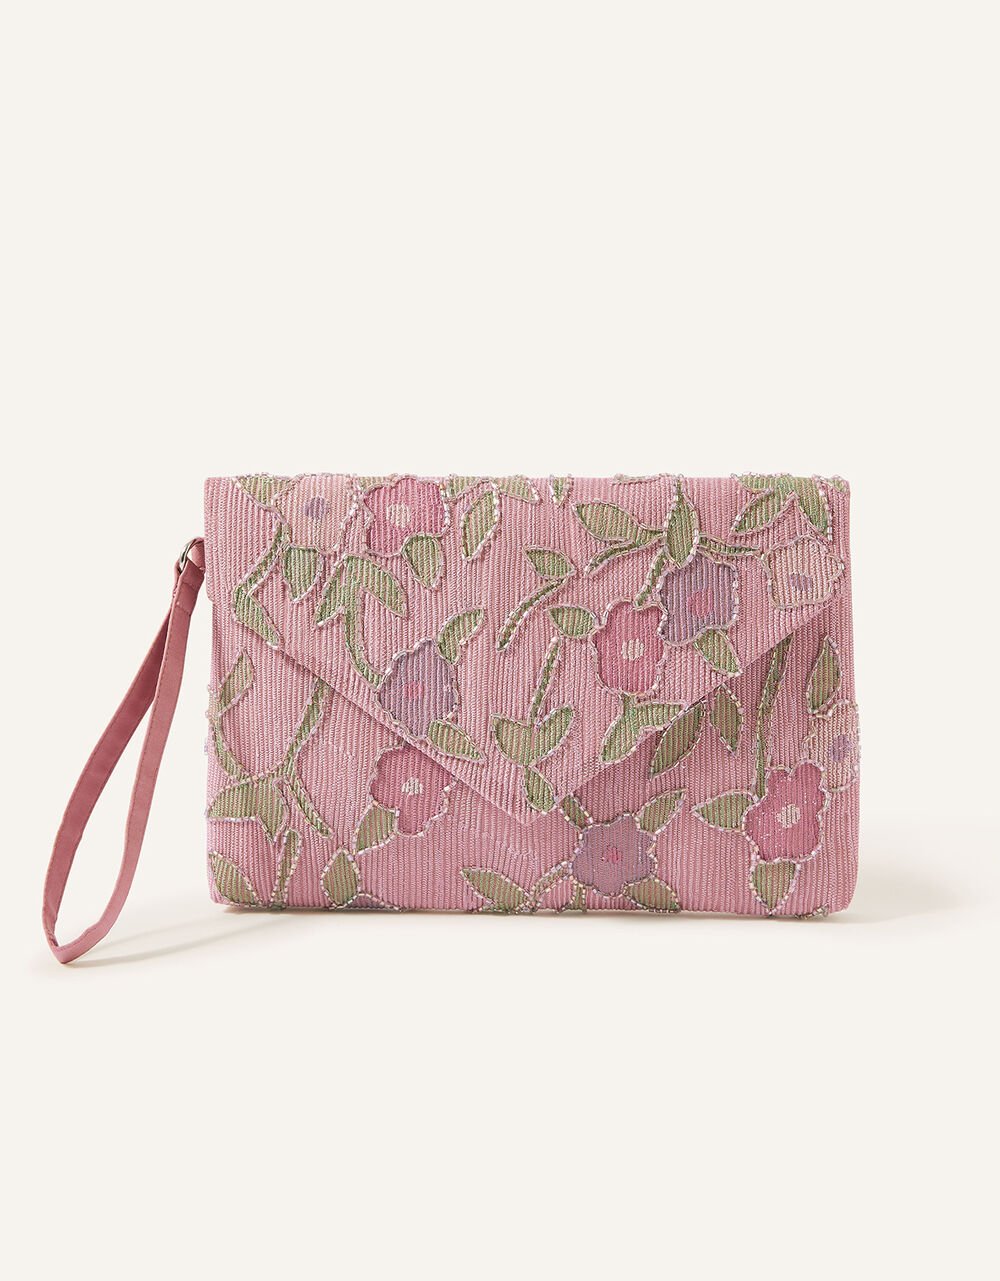 Women Women's Accessories | Floral Embellished Occasion Envelope Clutch Bag - IA51995